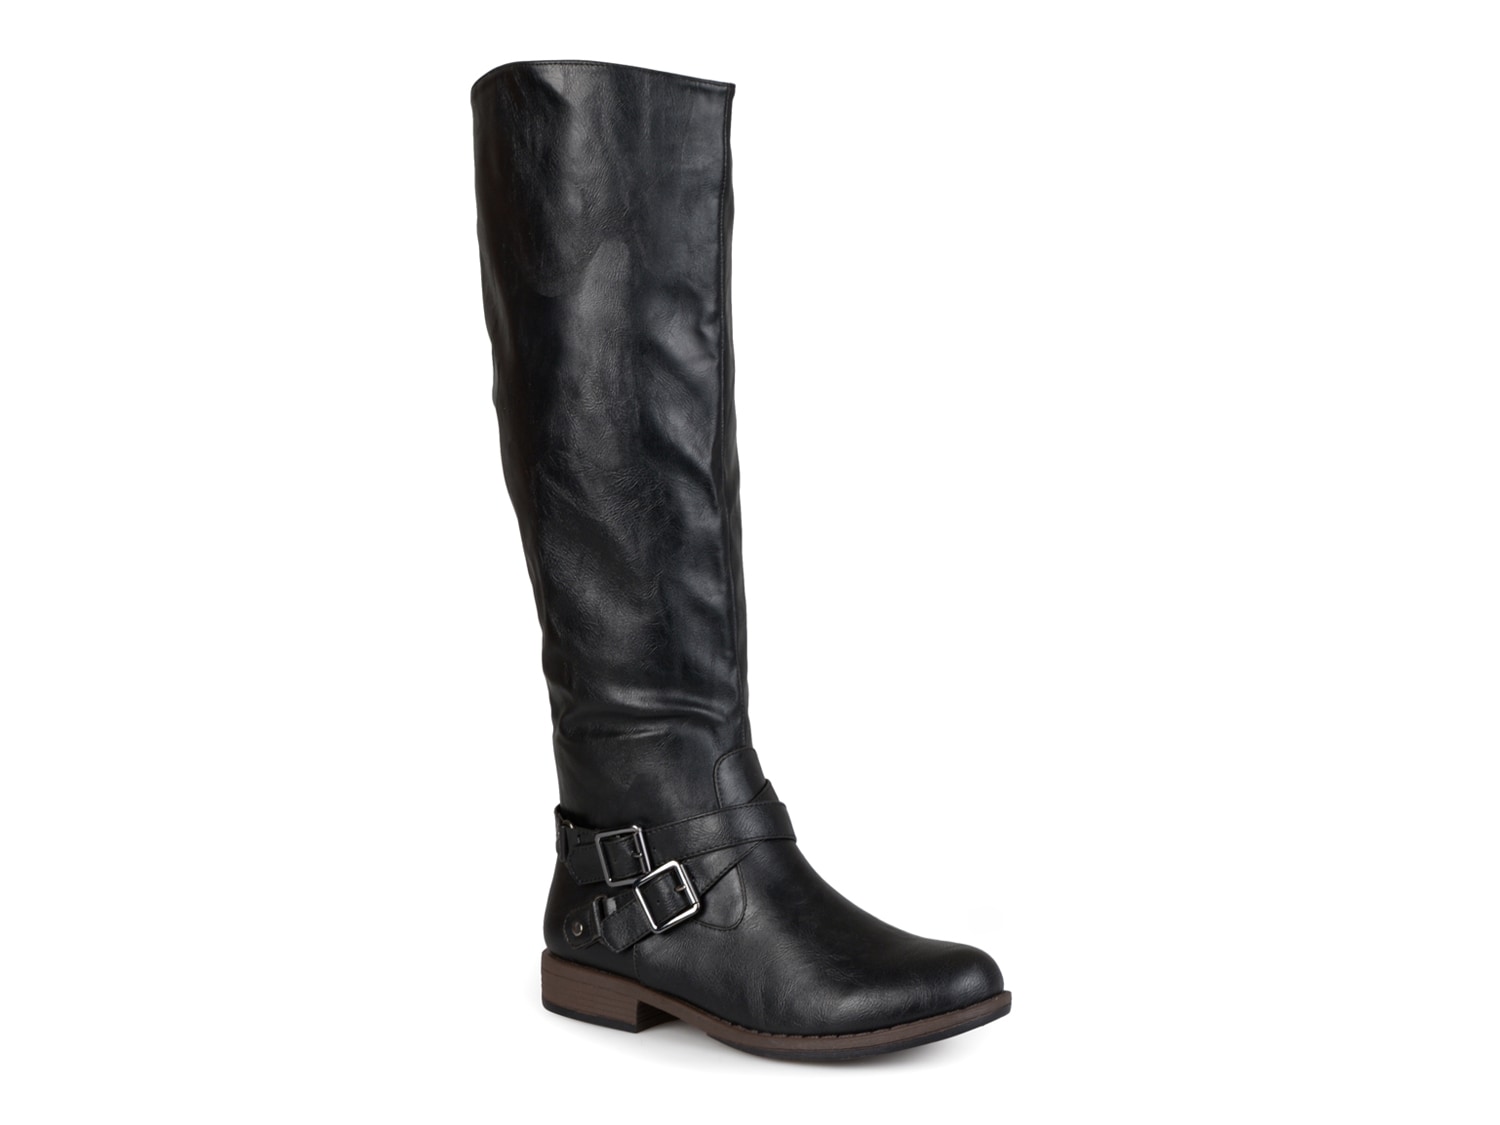 Journee Collection April Riding Boot 